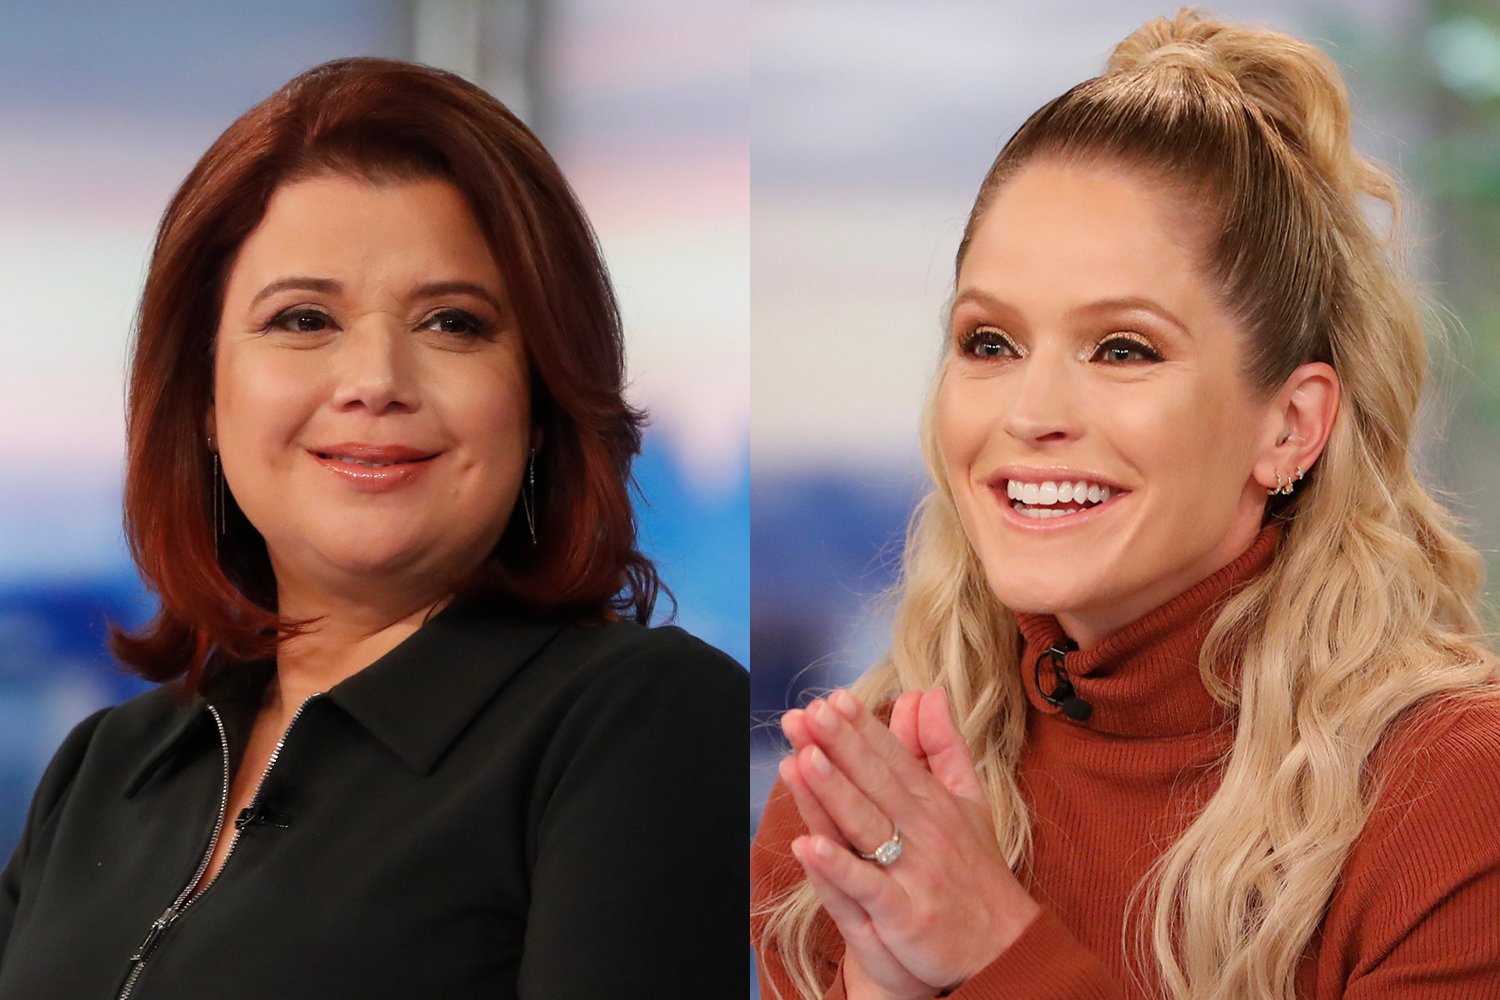 ‘The View’ Co-Host Ana Navarro Compares Sara Haines’ Dress to a Toilet Paper Cover